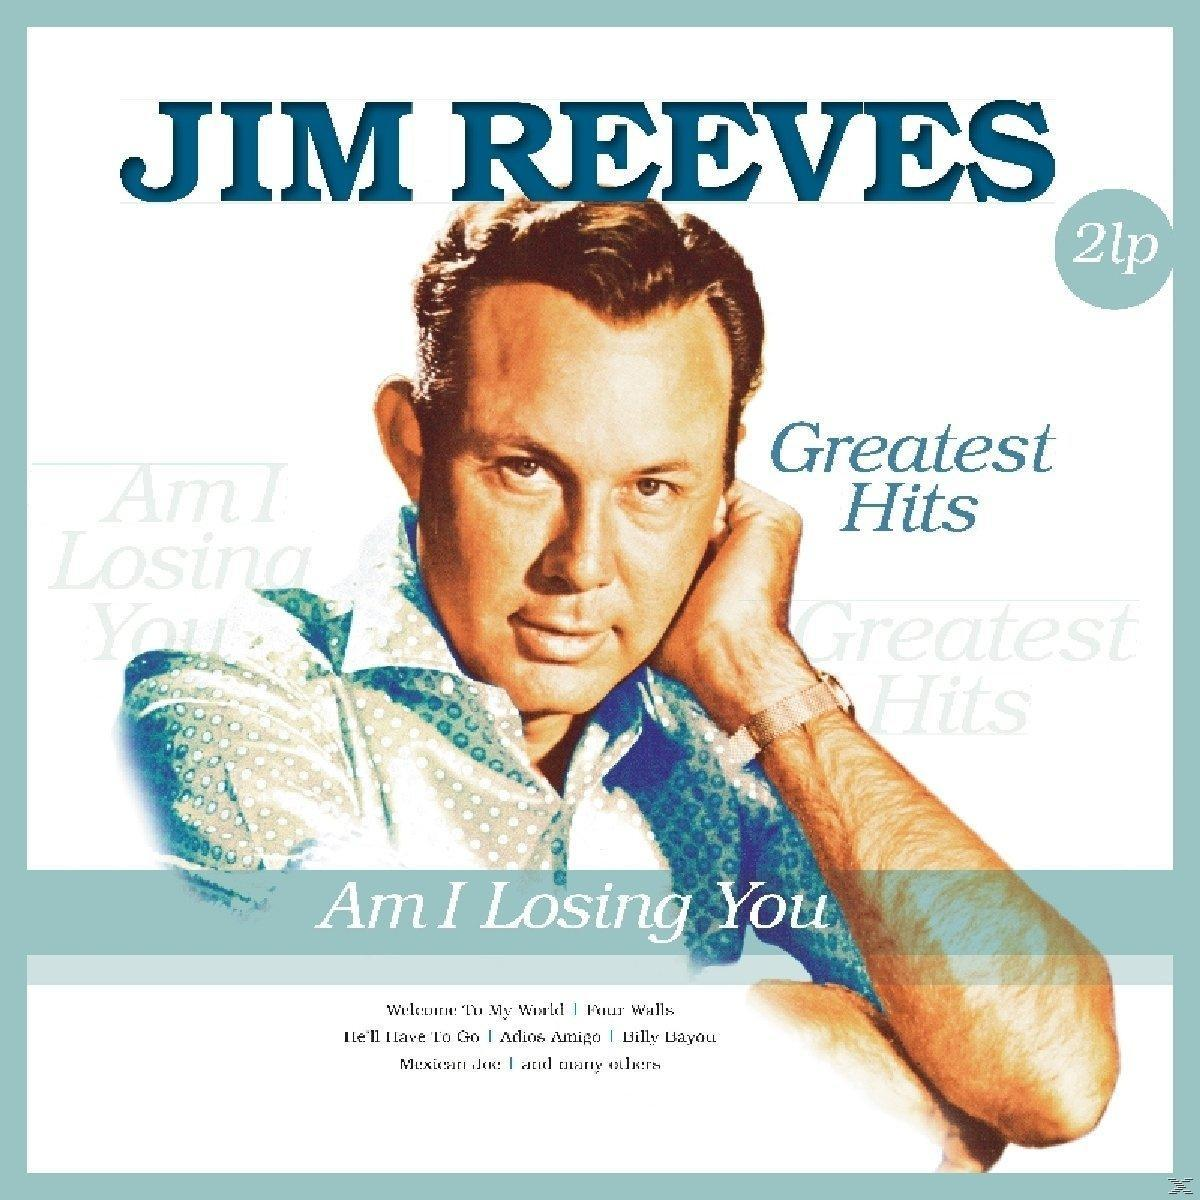 I Jim LOSING HITS Reeves YOU-GREATEST AM - (Vinyl) -